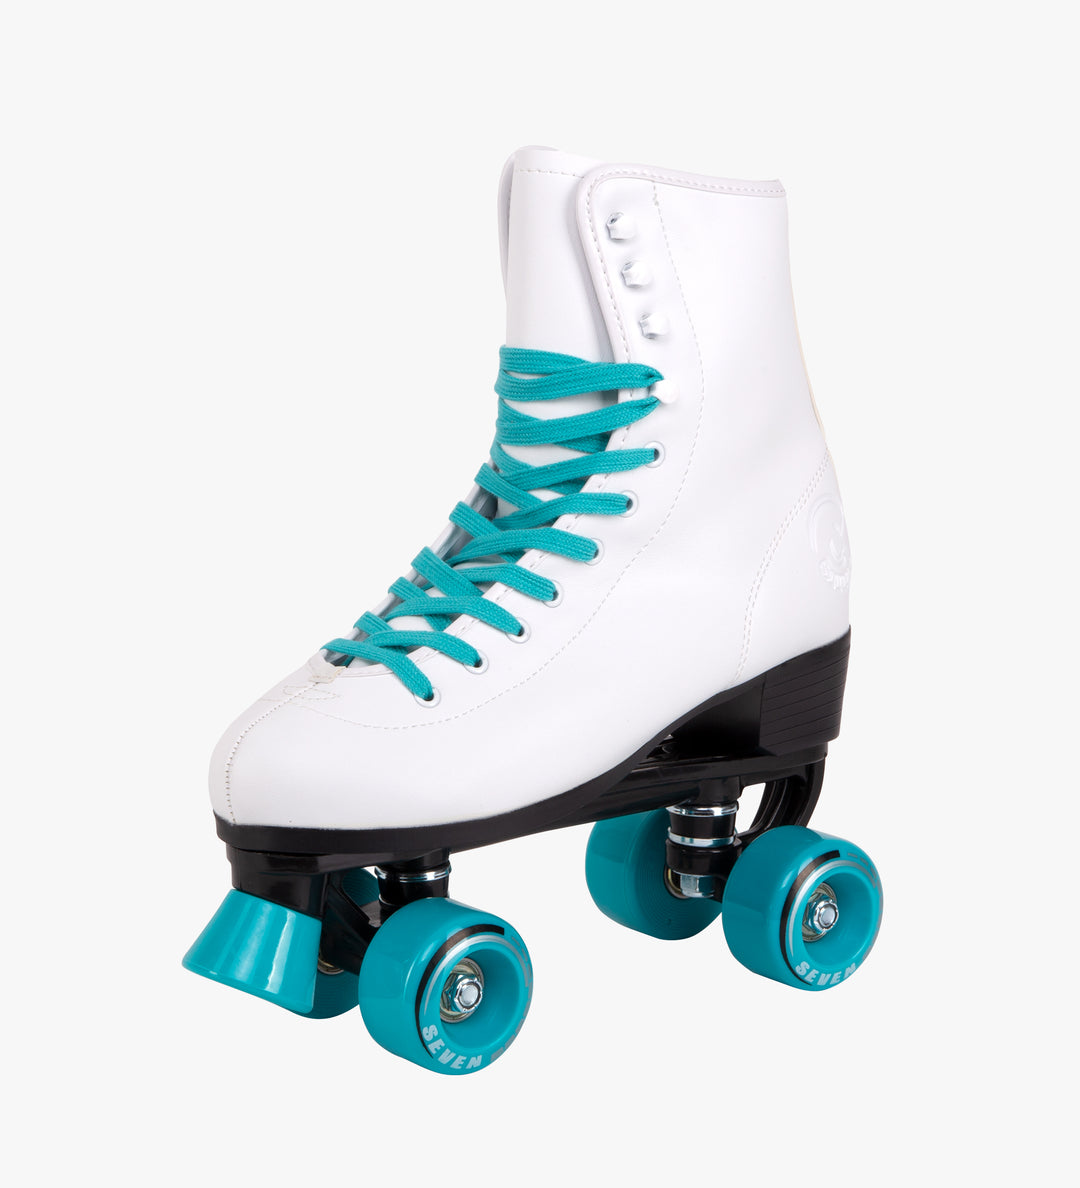 retro white quad roller skates with teal laces and wheels